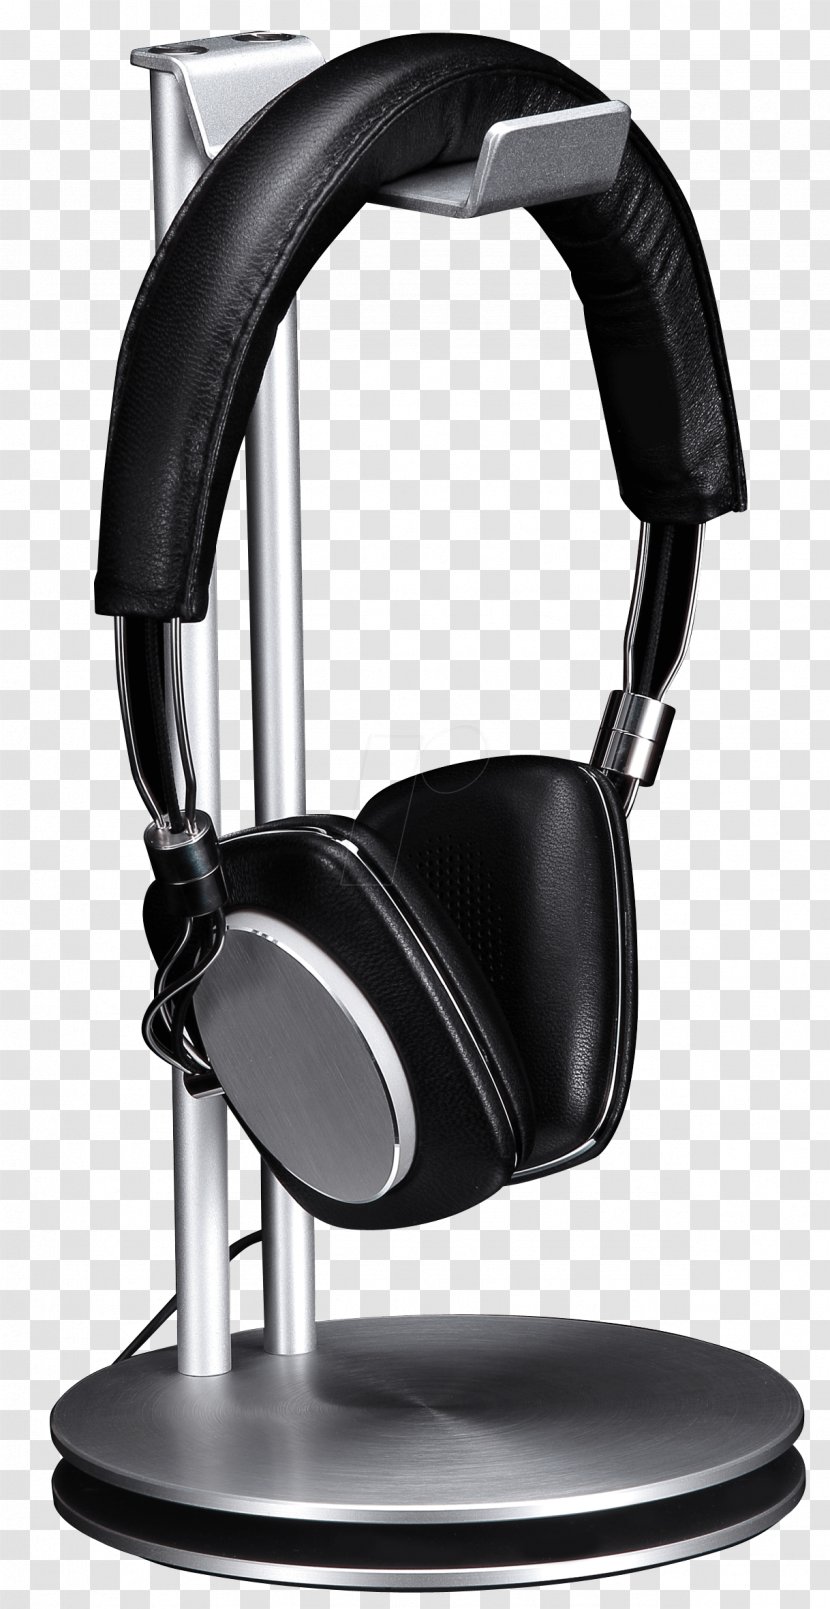 Headphones Just Mobile HeadStand Avant A4tech HS-100 Stereo Gaming Headset Office Headphone With Aux Mic Split Aluminium Amazon.com - Audio - Cable Transparent PNG